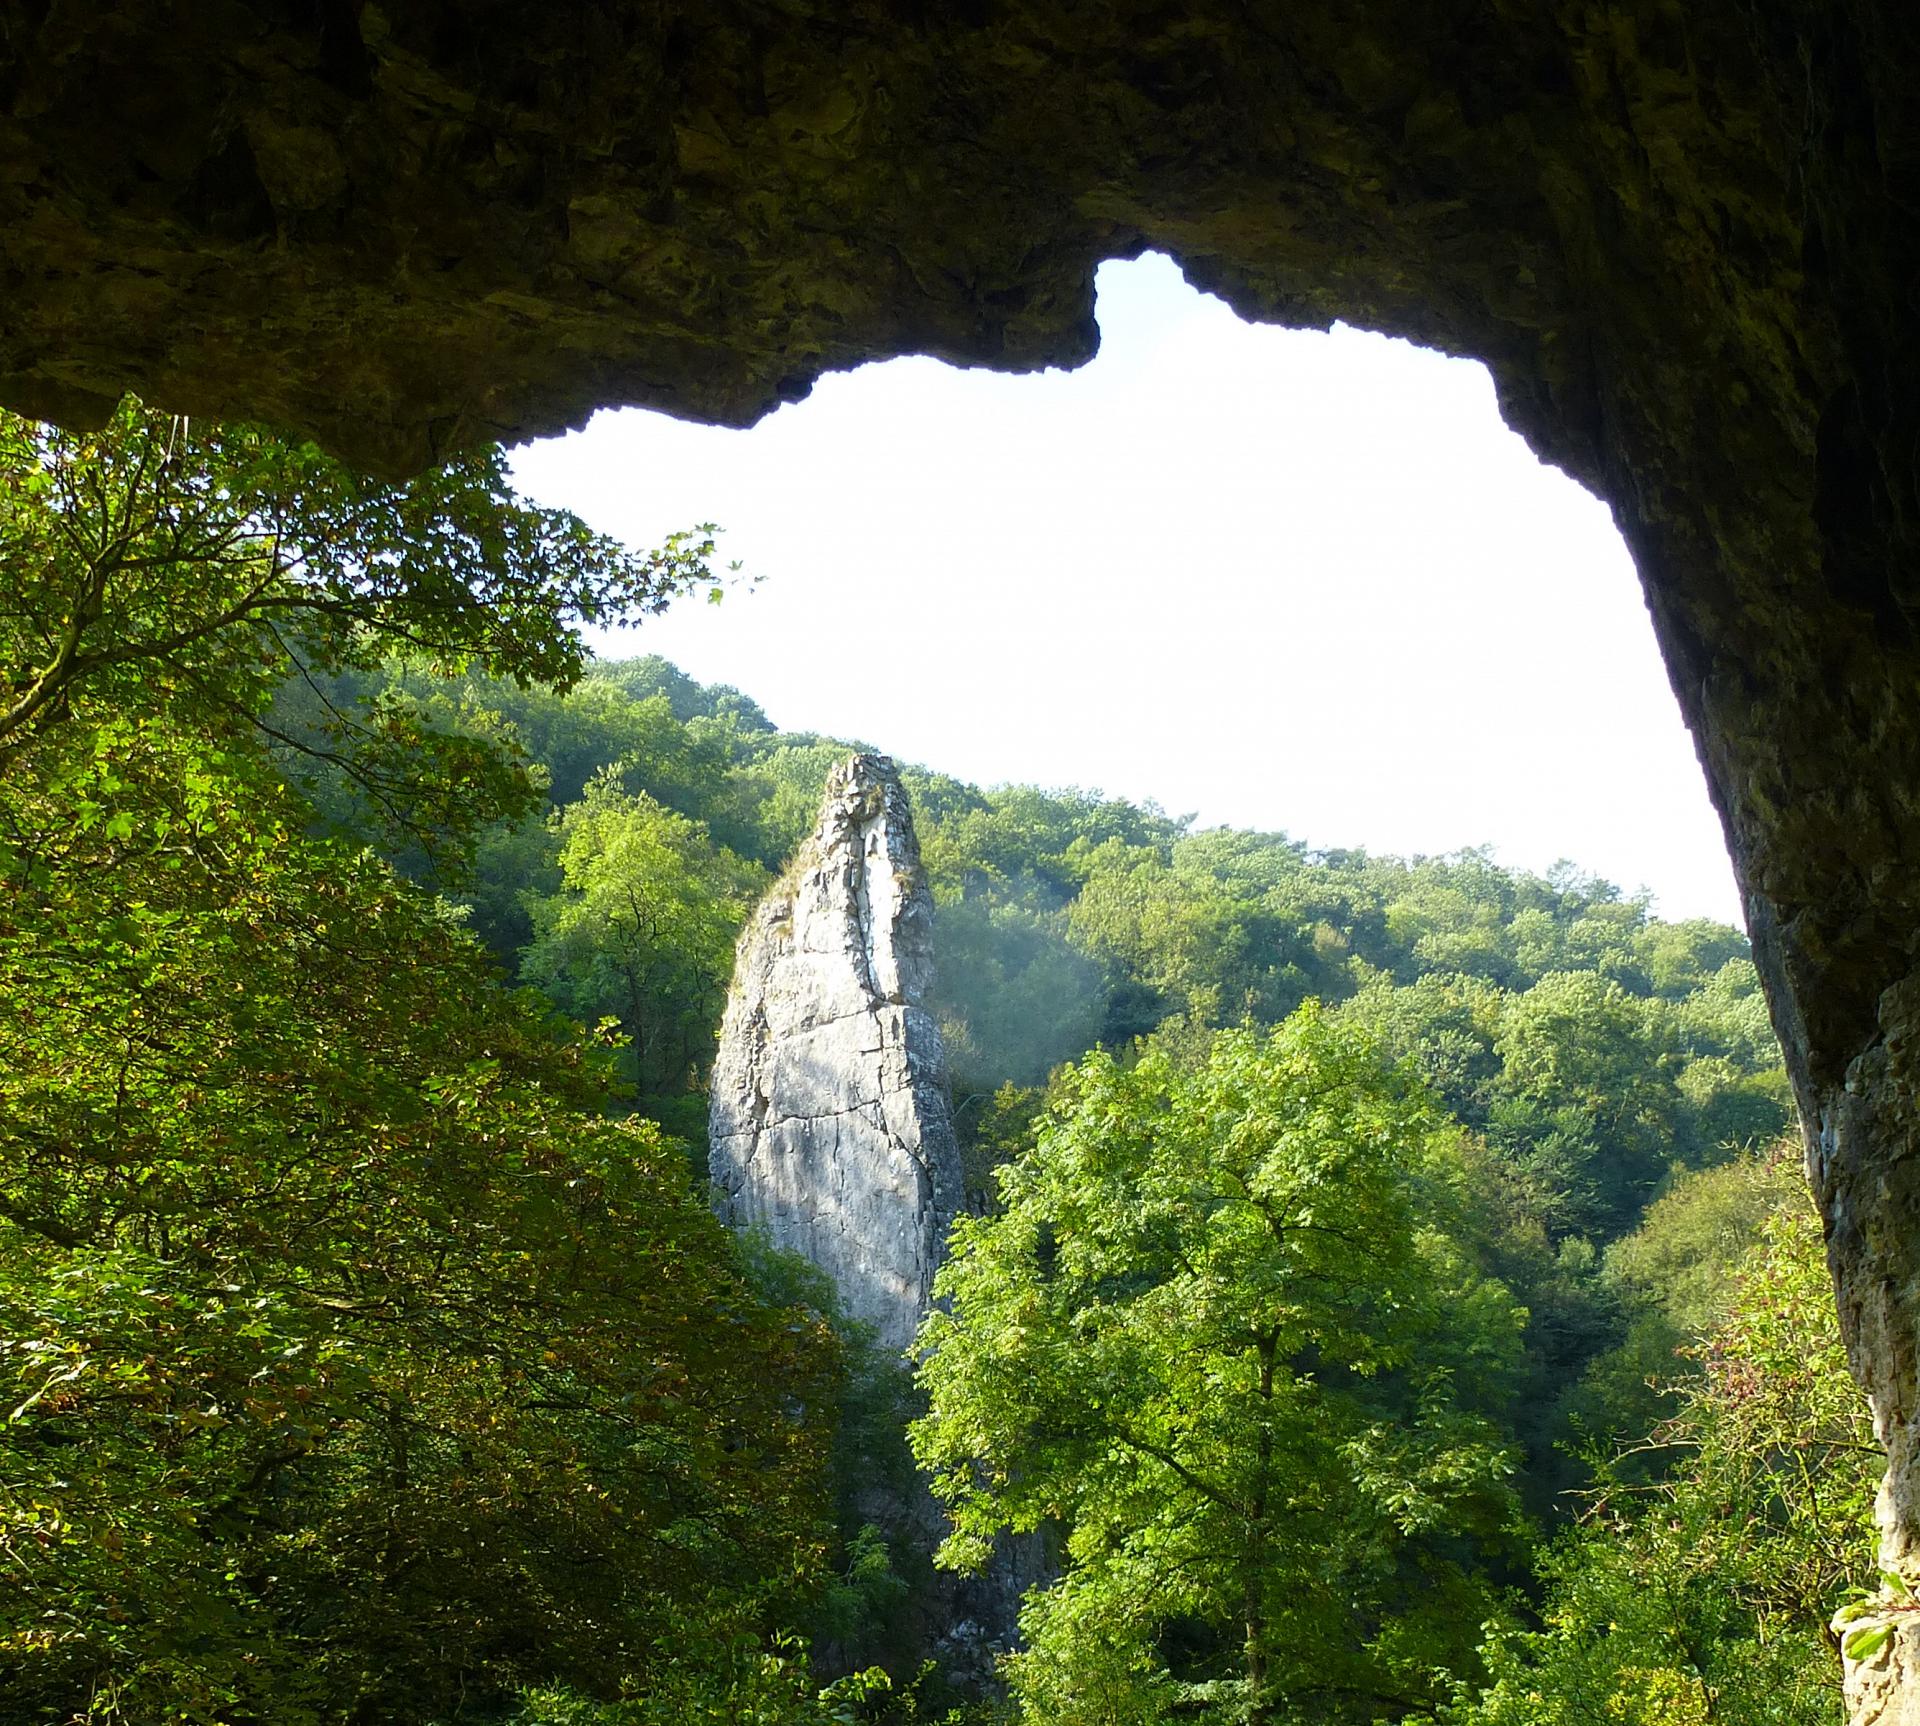 Dovedale spires and caves